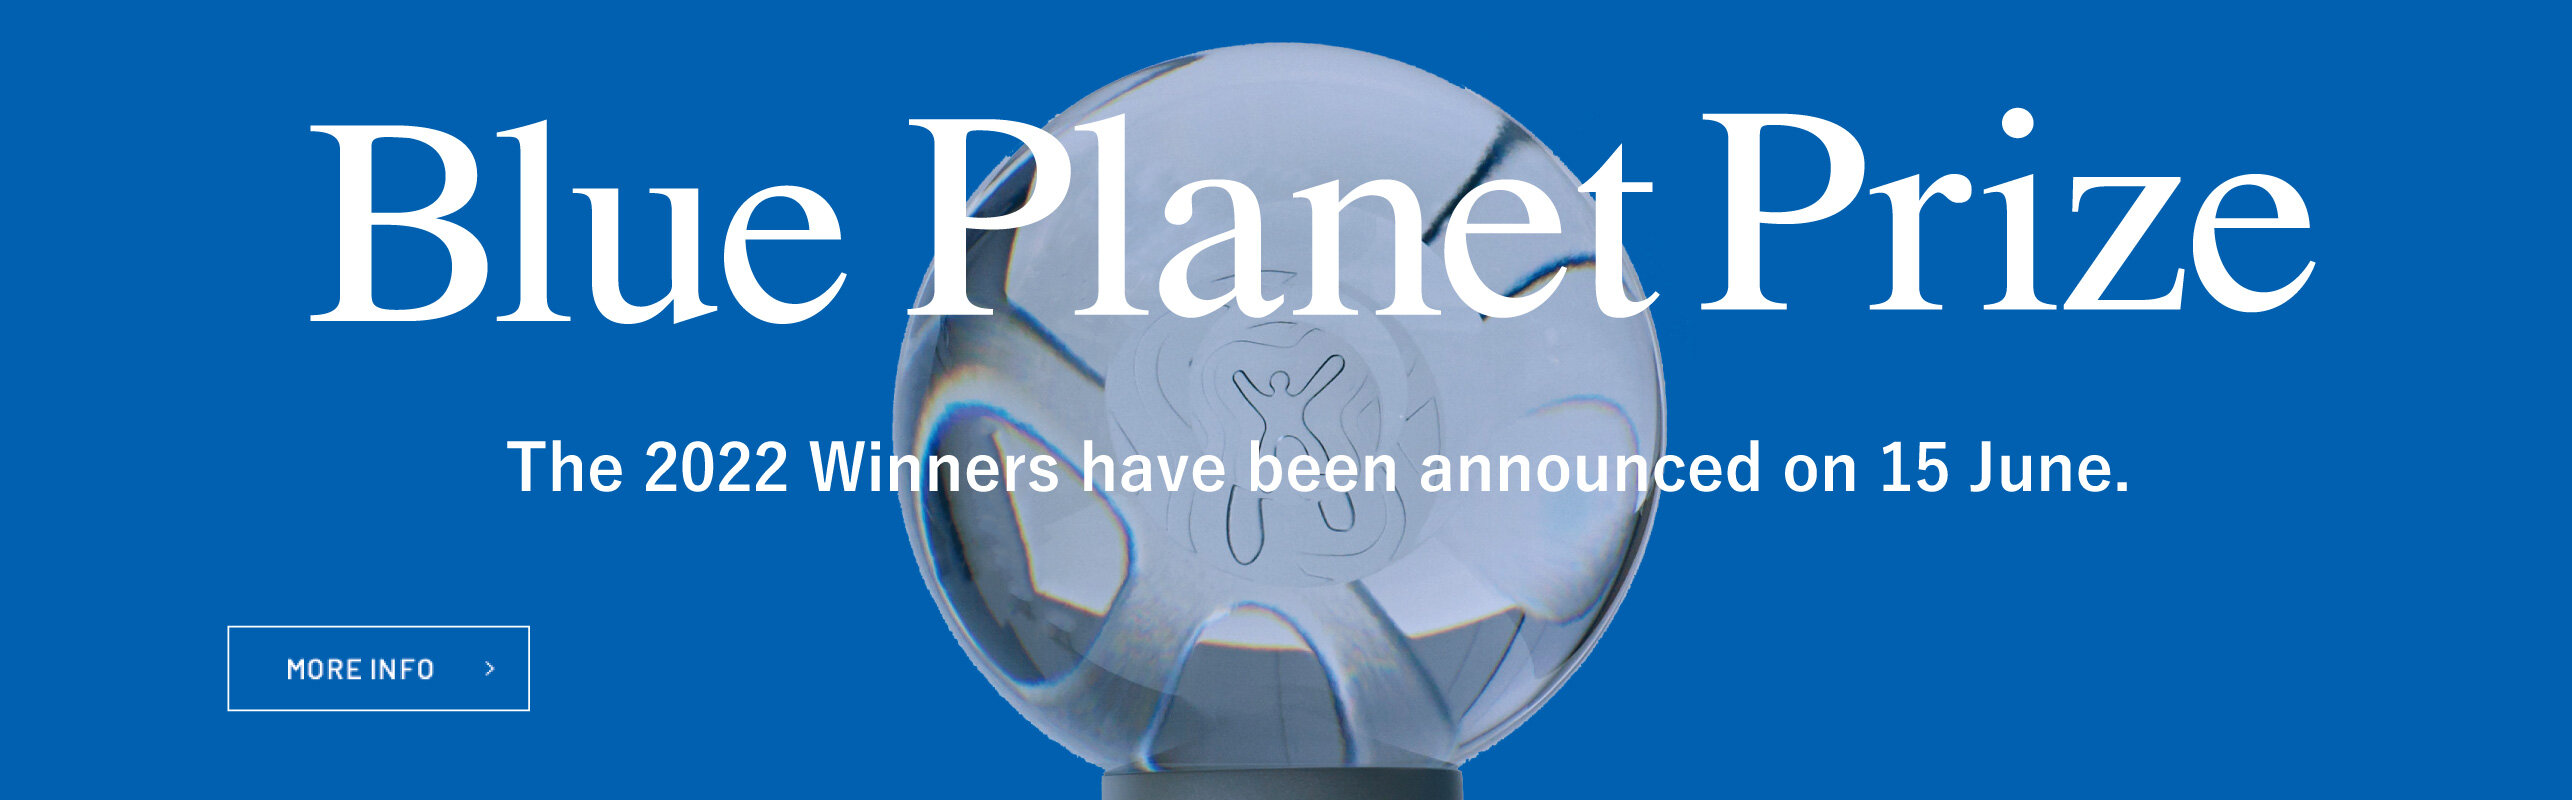 Announcing the 2022 Blue Planet Prize Winners